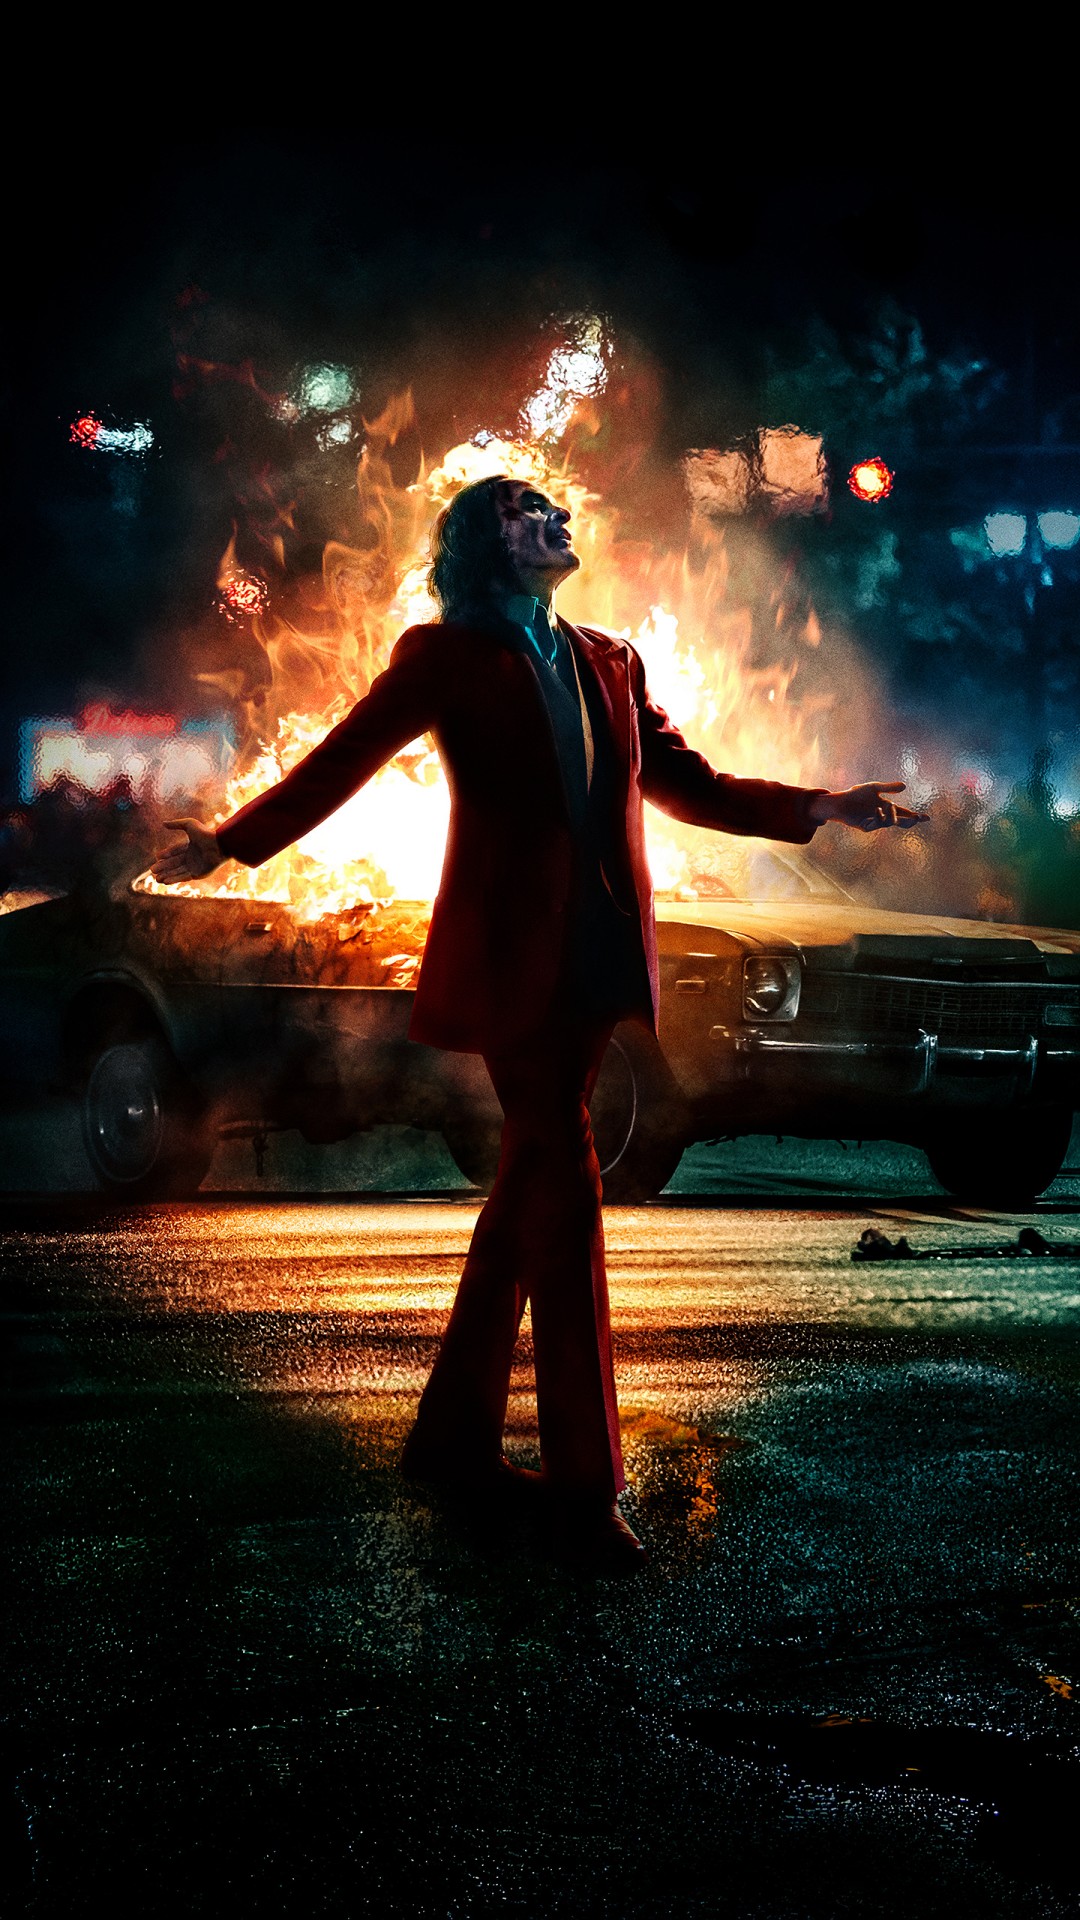 joker wallpaper for android,darkness,human,photography,fictional character,movie